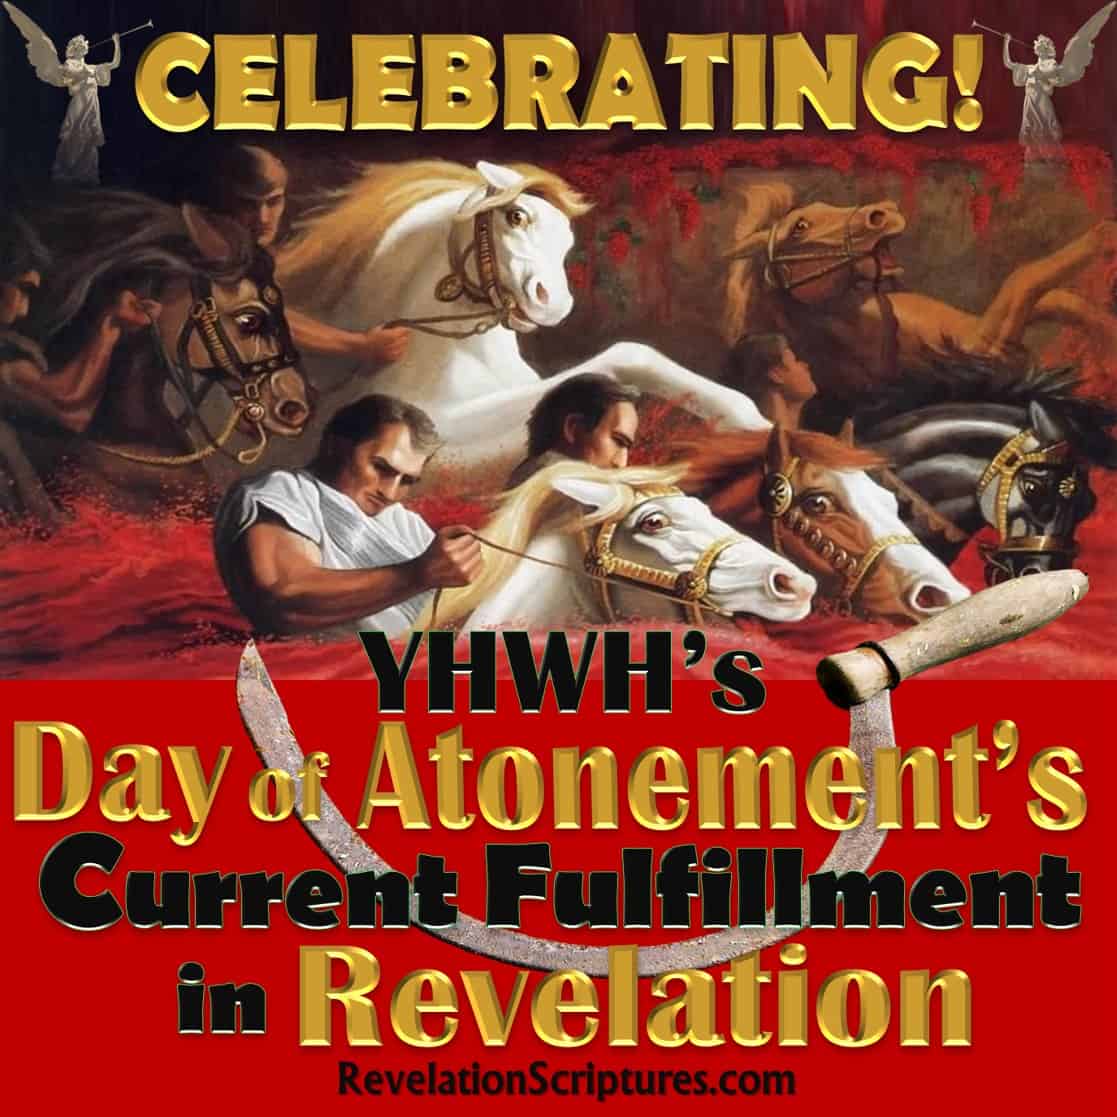 Day of Atonement,Yom Kippur,Book of Revelation,Atonement in Revelation,Day of Atonement in Revelation,Old Testament,Bible,Leviticus,hebrew,High Priest,Sacrifice,mercy seat,temple,lamb,scapegoat,Israel,Jewish Holy Days,Jewish Holidays,blood,blood atonement,cleanse,wash,forgive,cover,purify,pardon,redeem,purge,putoff,reconcile,reconciliation,pacify,Leviticus 17,Yom Kippur in Revelation,Feast in Revelation,Altar,Blood Altar,Sacrifice,